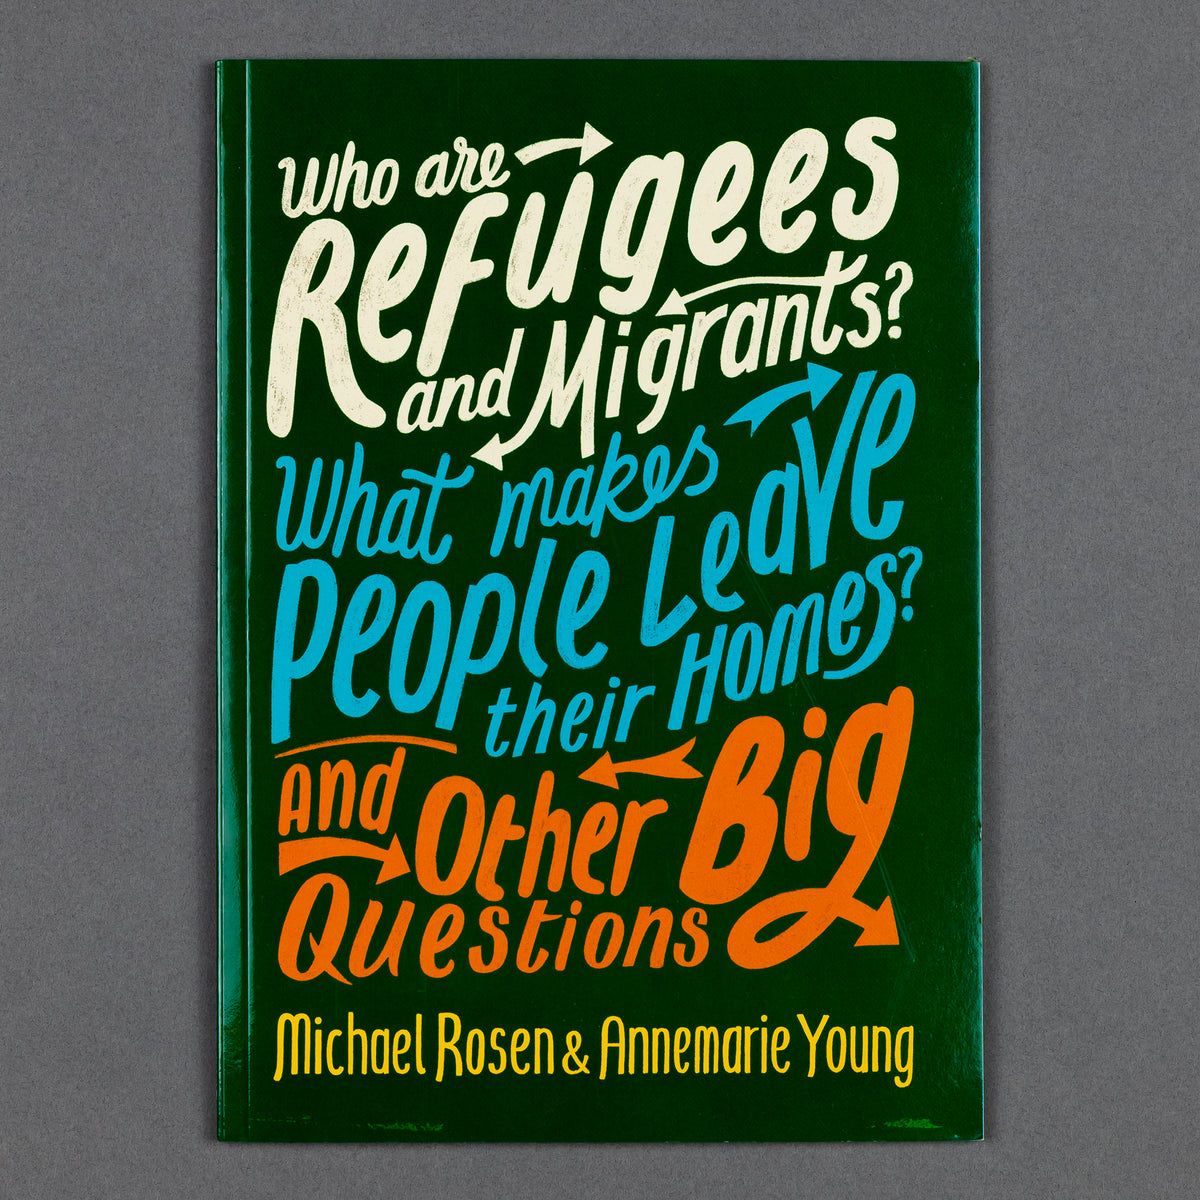 Who are Refugees and Migrants?